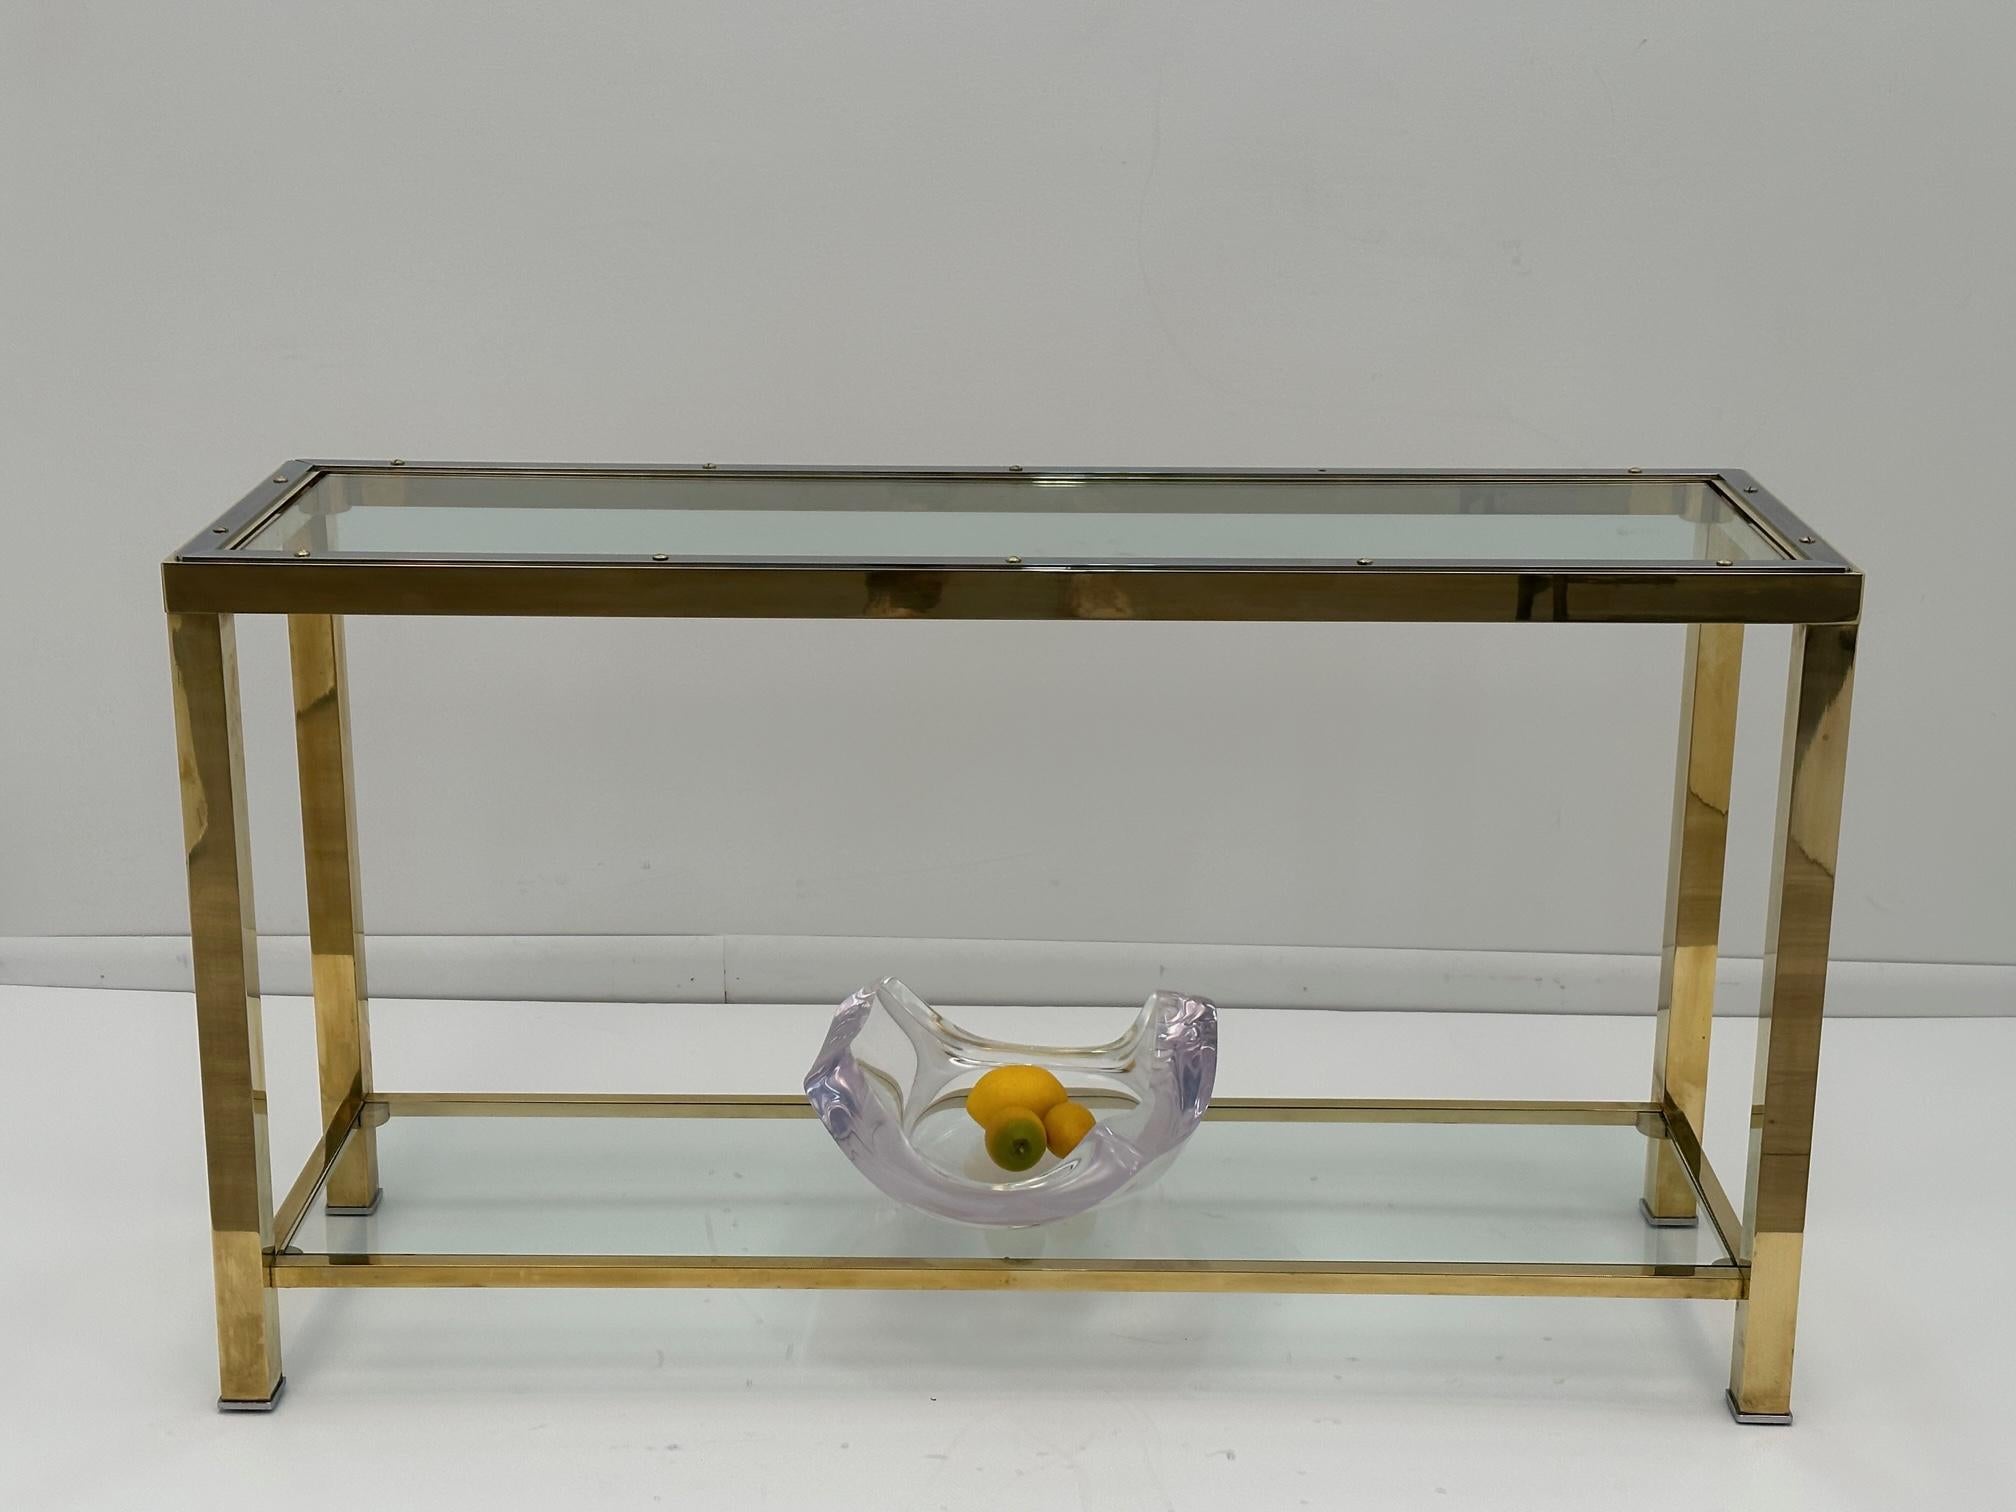 Tan France Auction Pick

Stylish sleek console attributed to Pierre Cardin having a sophisticated and versatile mix of brass and chrome, two tiers, and brand new glass.
Lower tier is 4.5